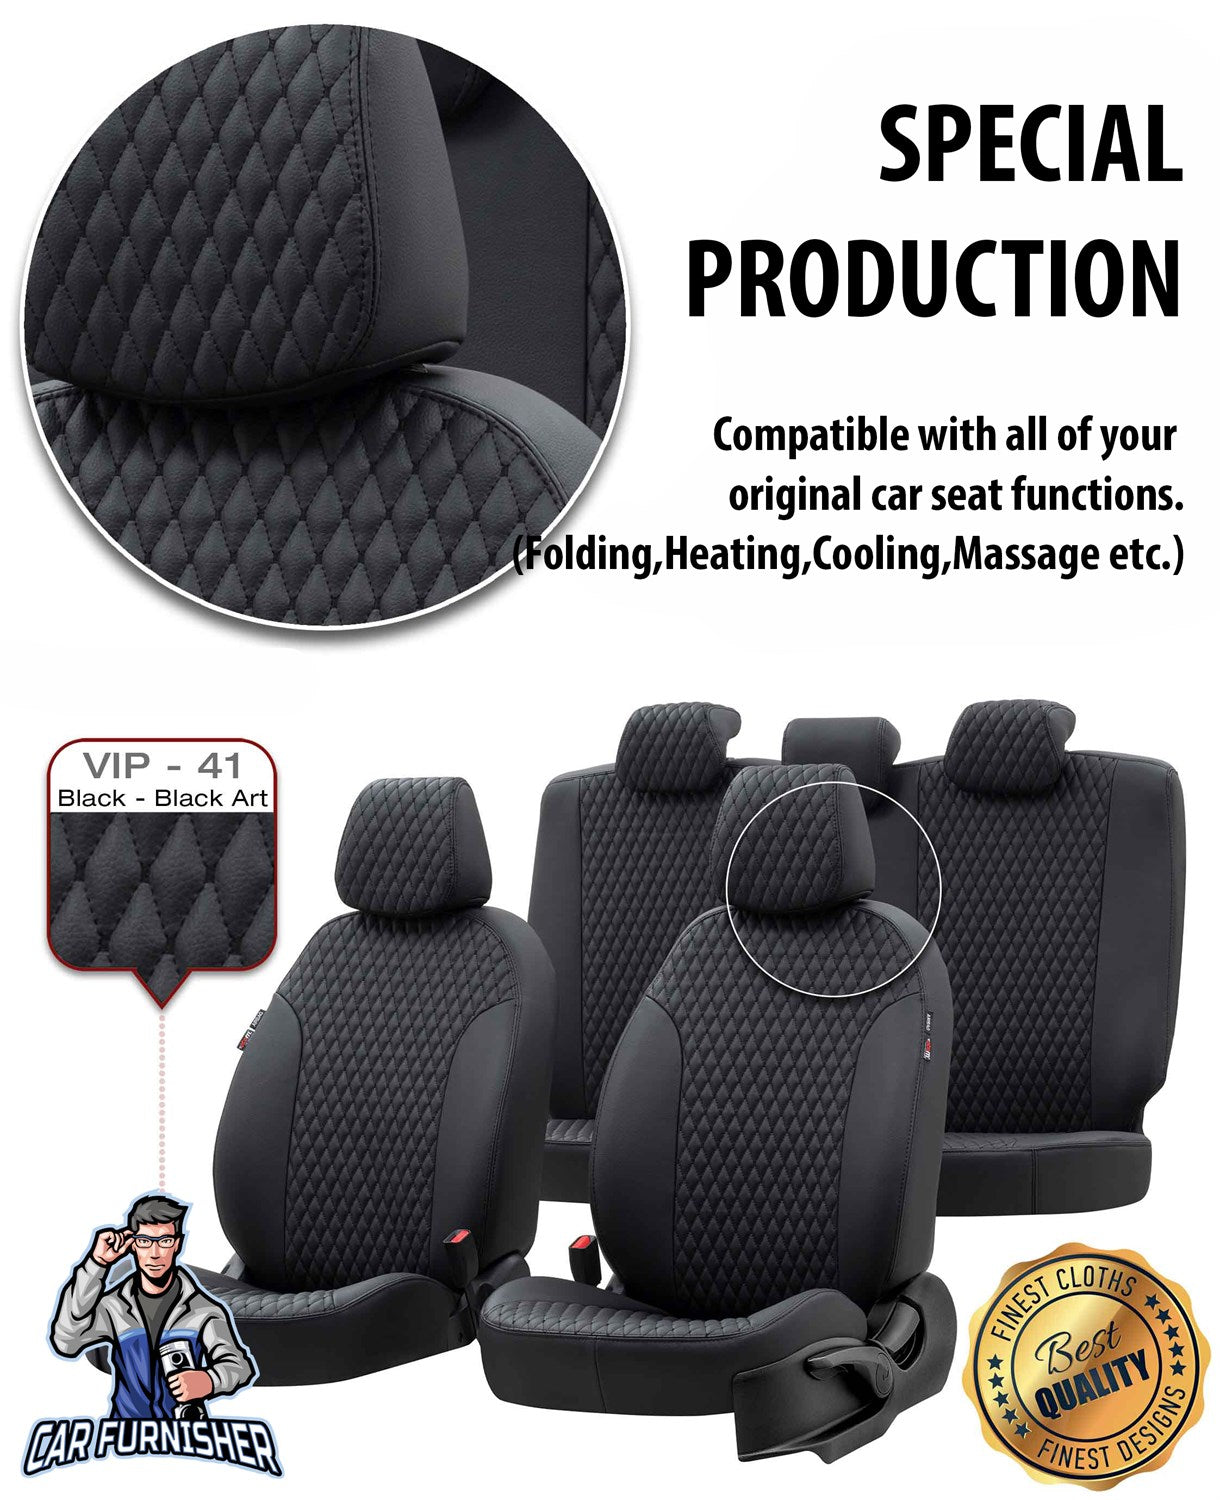 Man TGS Seat Cover Amsterdam Leather Design Black Front Seats (2 Seats + Handrest + Headrests) Leather